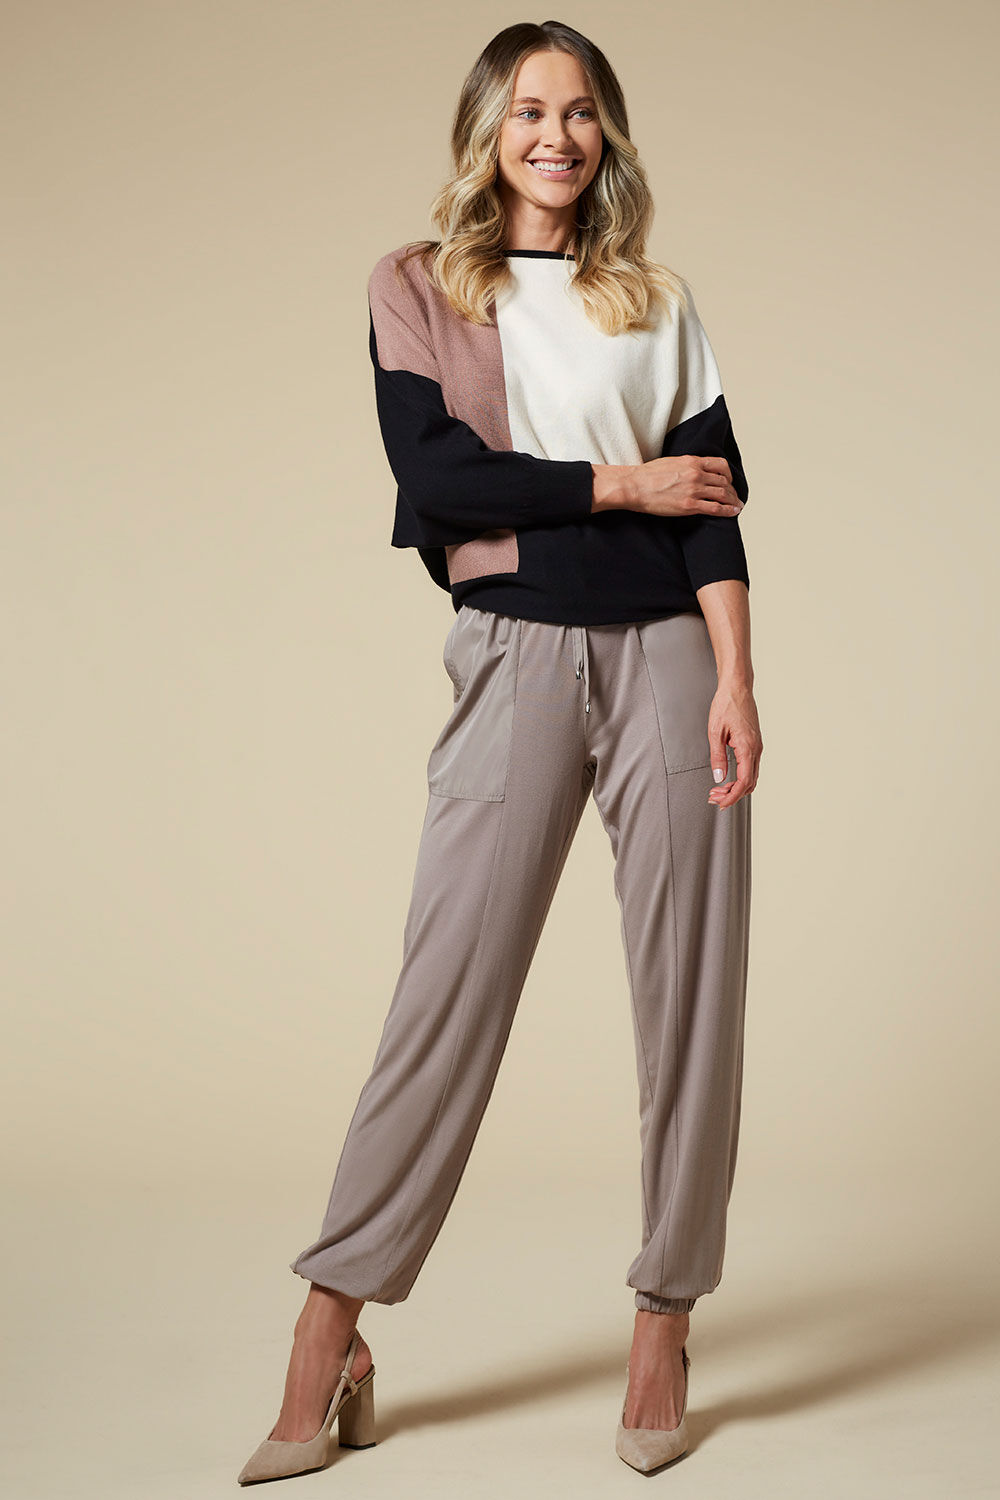 Black Tropical Cuffed Hem Soft Trousers  Womens Trousers  Select Fashion  Online